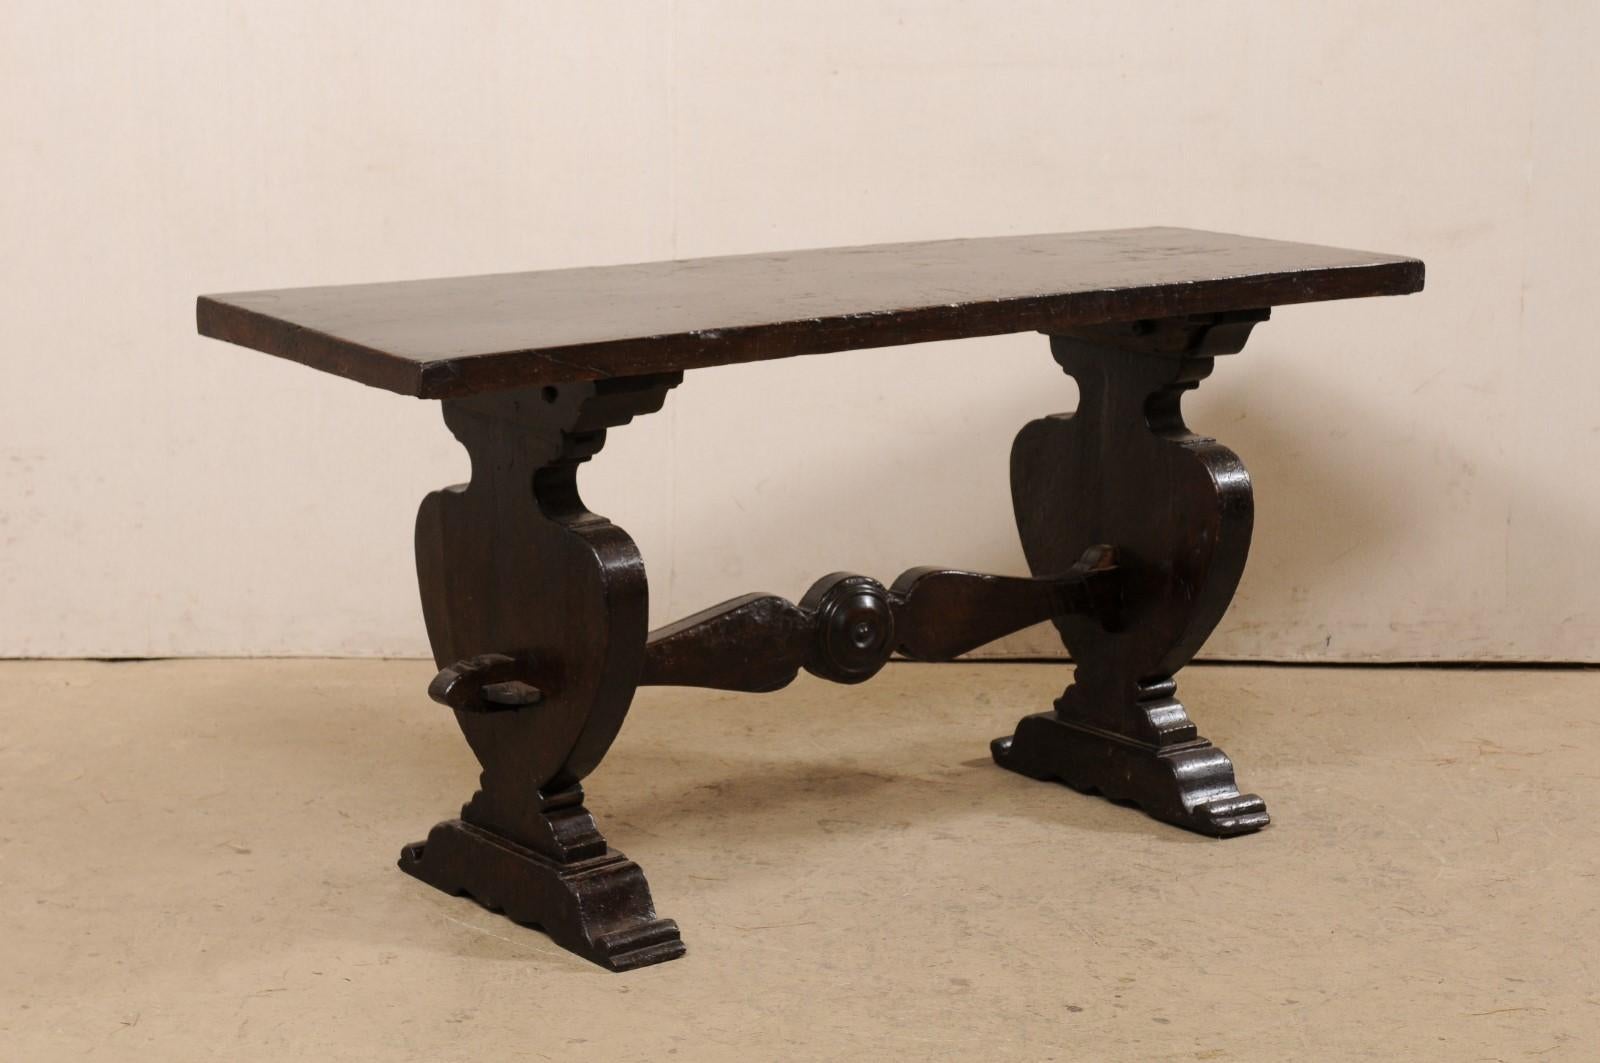 An Italian carved wood trestle table from the 18th century. This antique table from Italy features a single board top, rectangular in shape, which is raised on a pair of urn-shaped legs flanking either side, with stacked rail feet. A beautifully